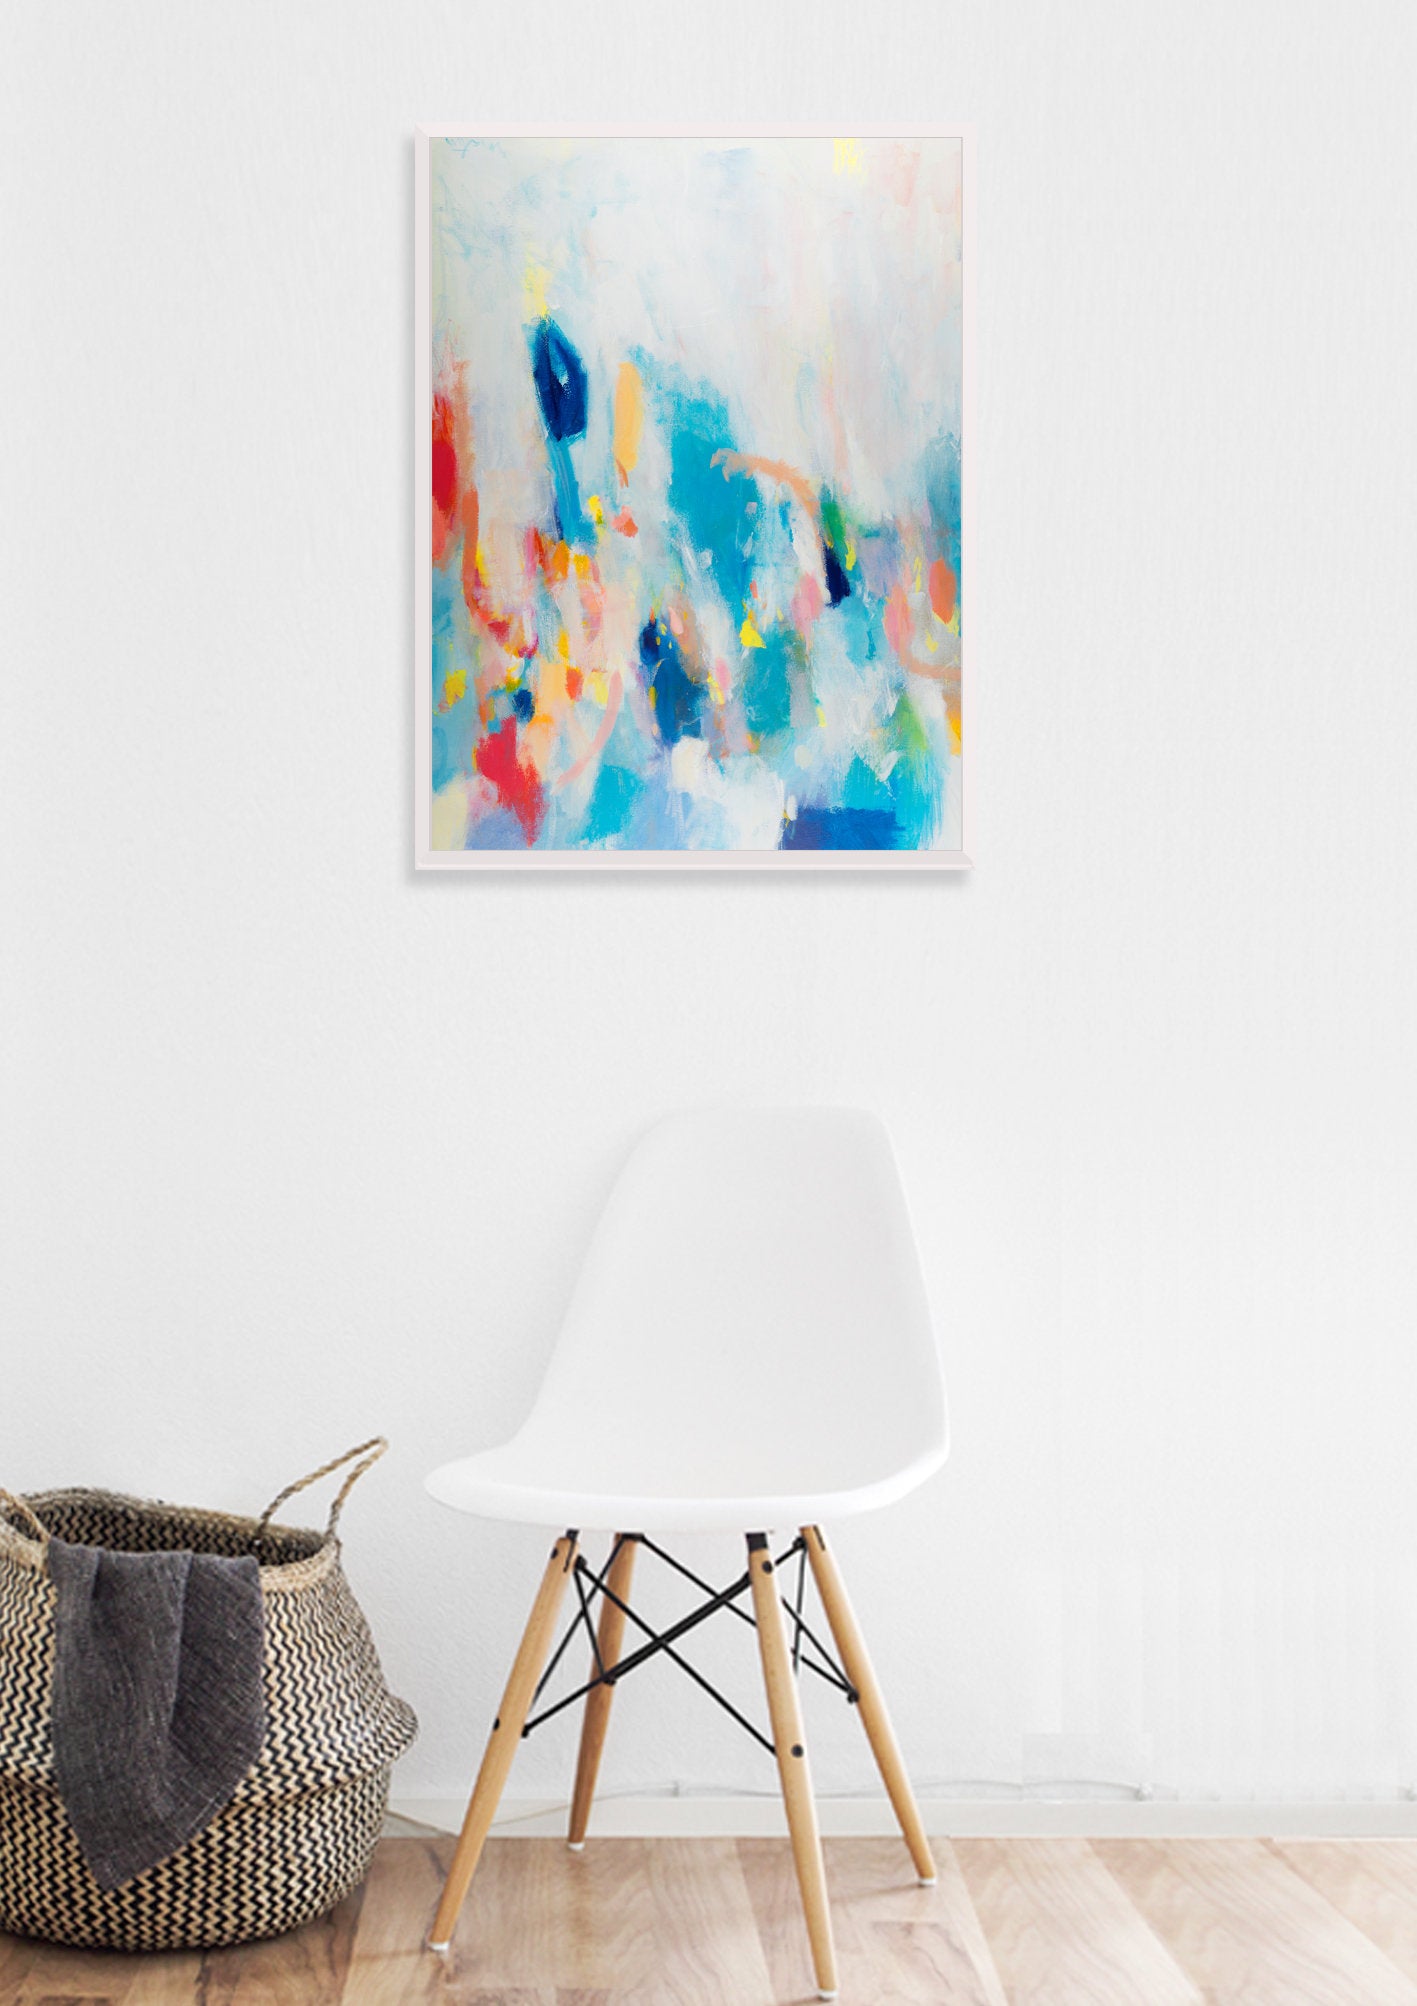 colorful abstract painting, blue abstract wall art, abstract painting for living room, Contemporary art, wall abstract by Camilo Mattis - camilomattis.com